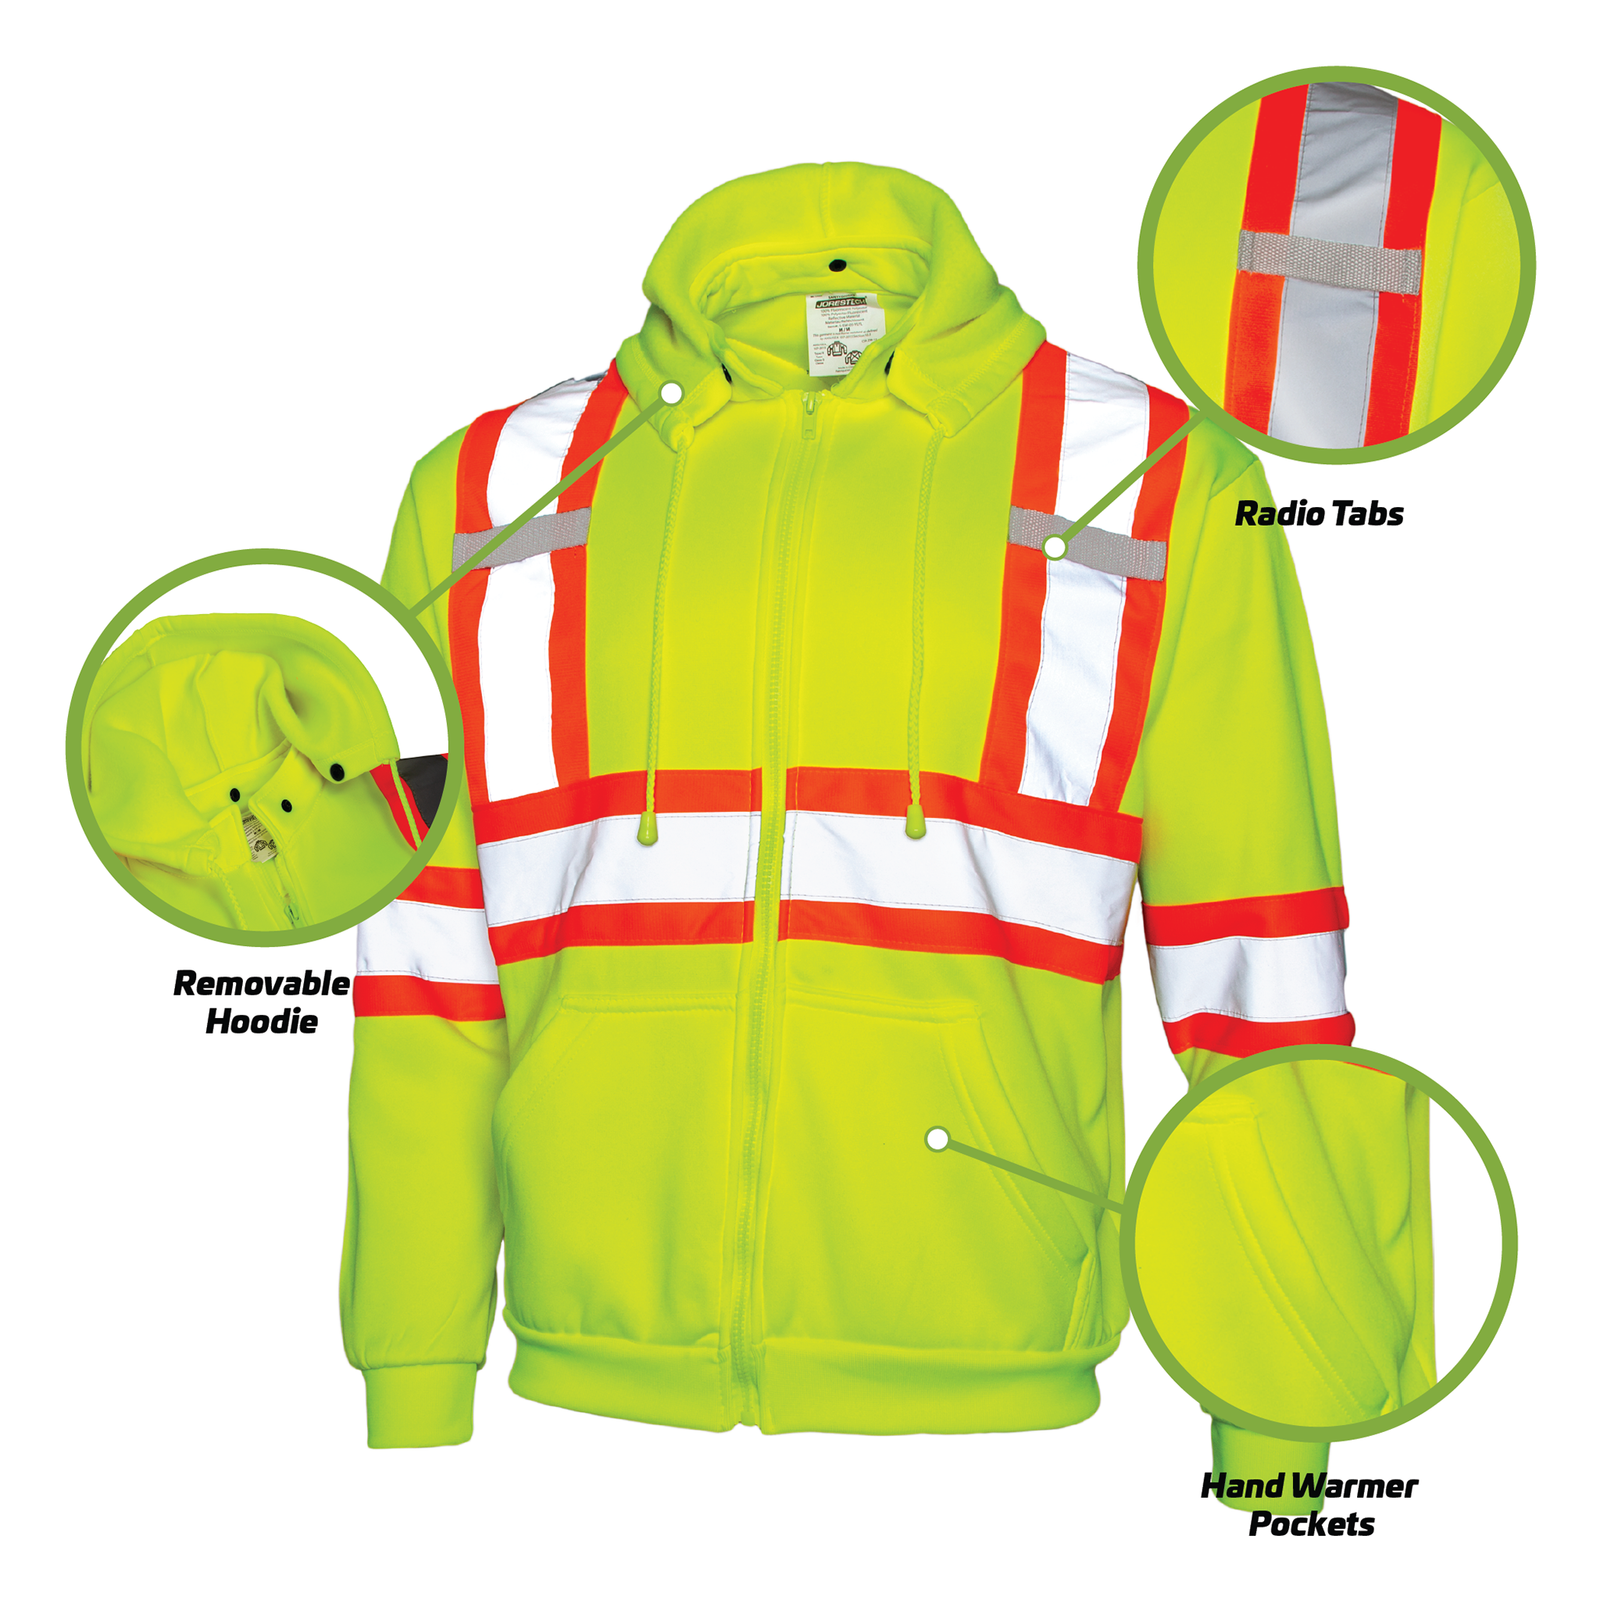 Yellow hi vis sweater and close ups of the radio tap, the removable hood and the hand warmer pocket